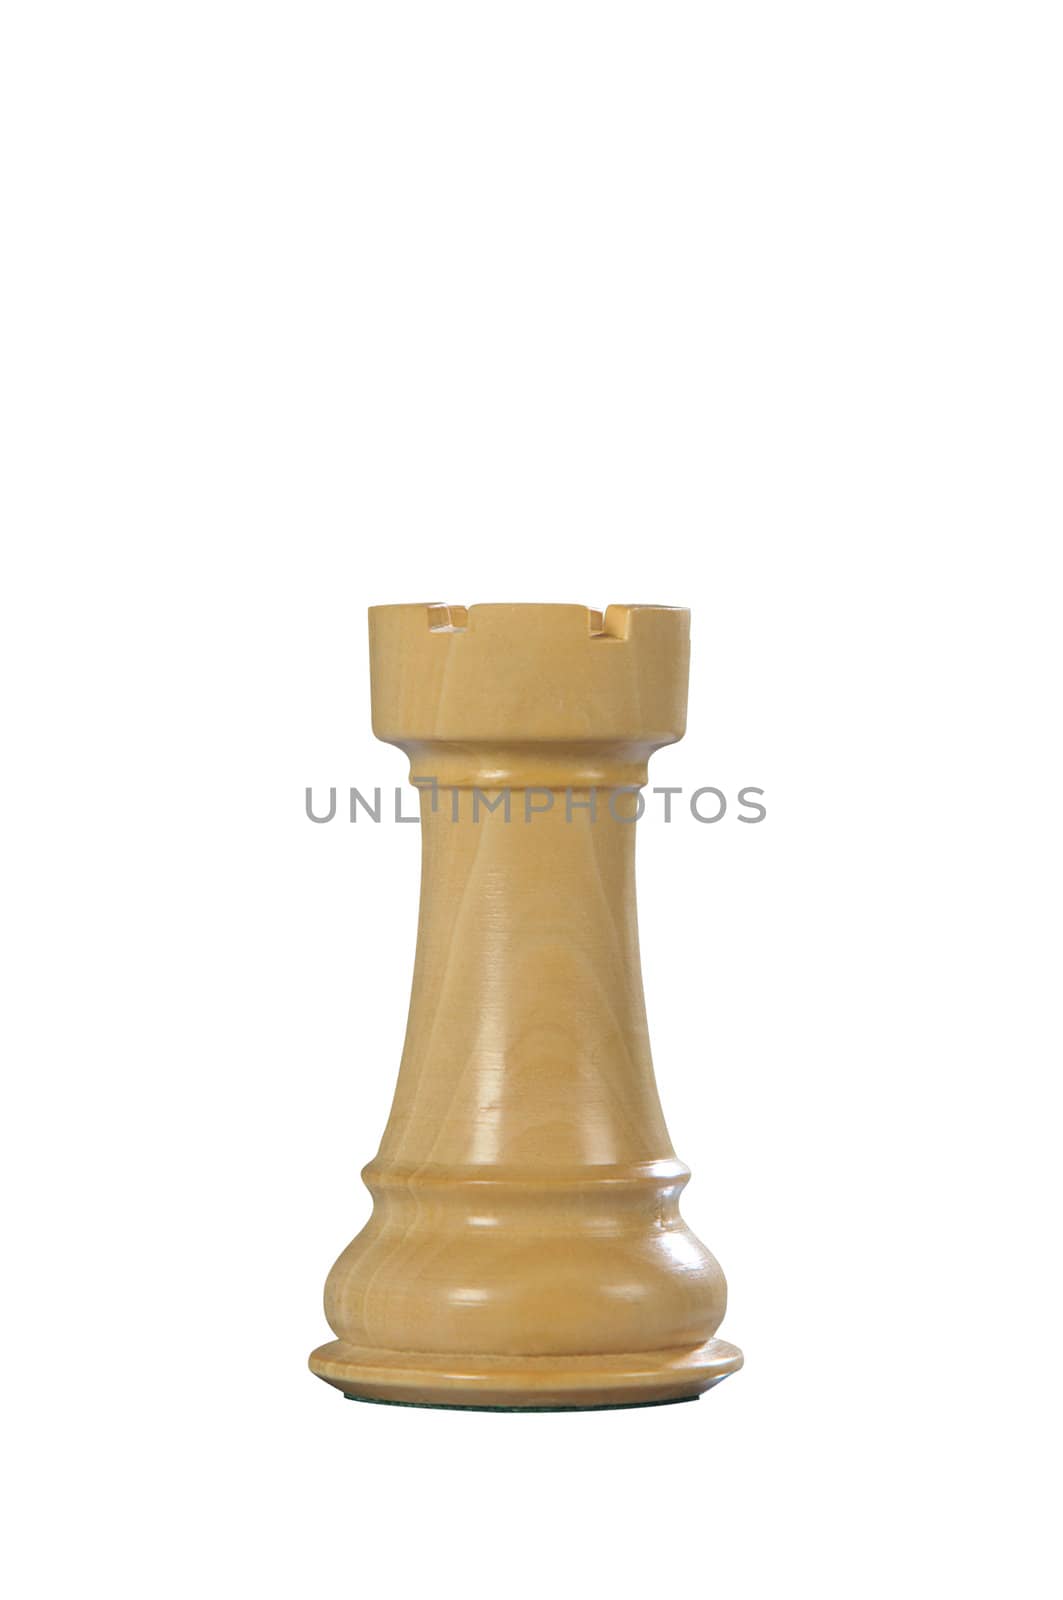 White wooden tower - one of 12 different chess pieces.